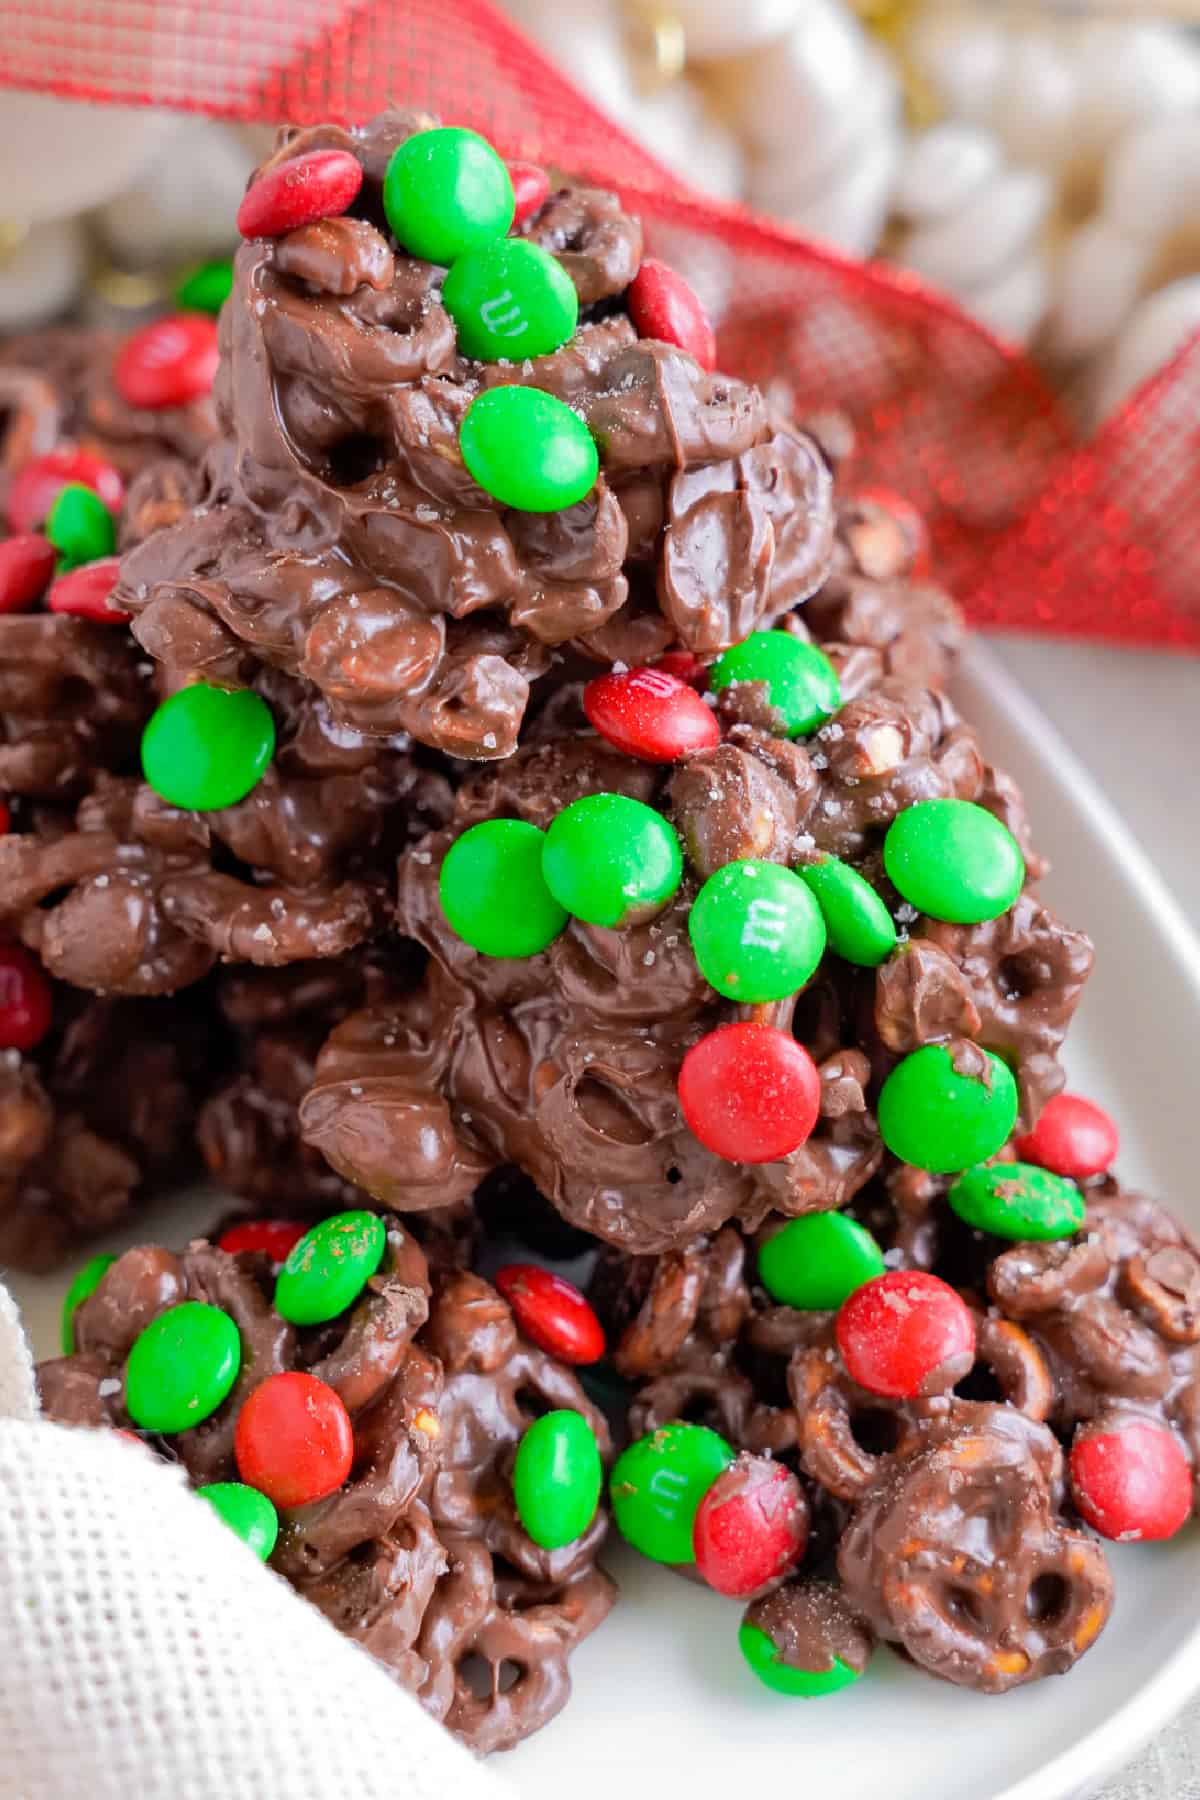 Chocolate cluster crockpot candy piled on a platter covered in red and green M&Ms from the side.